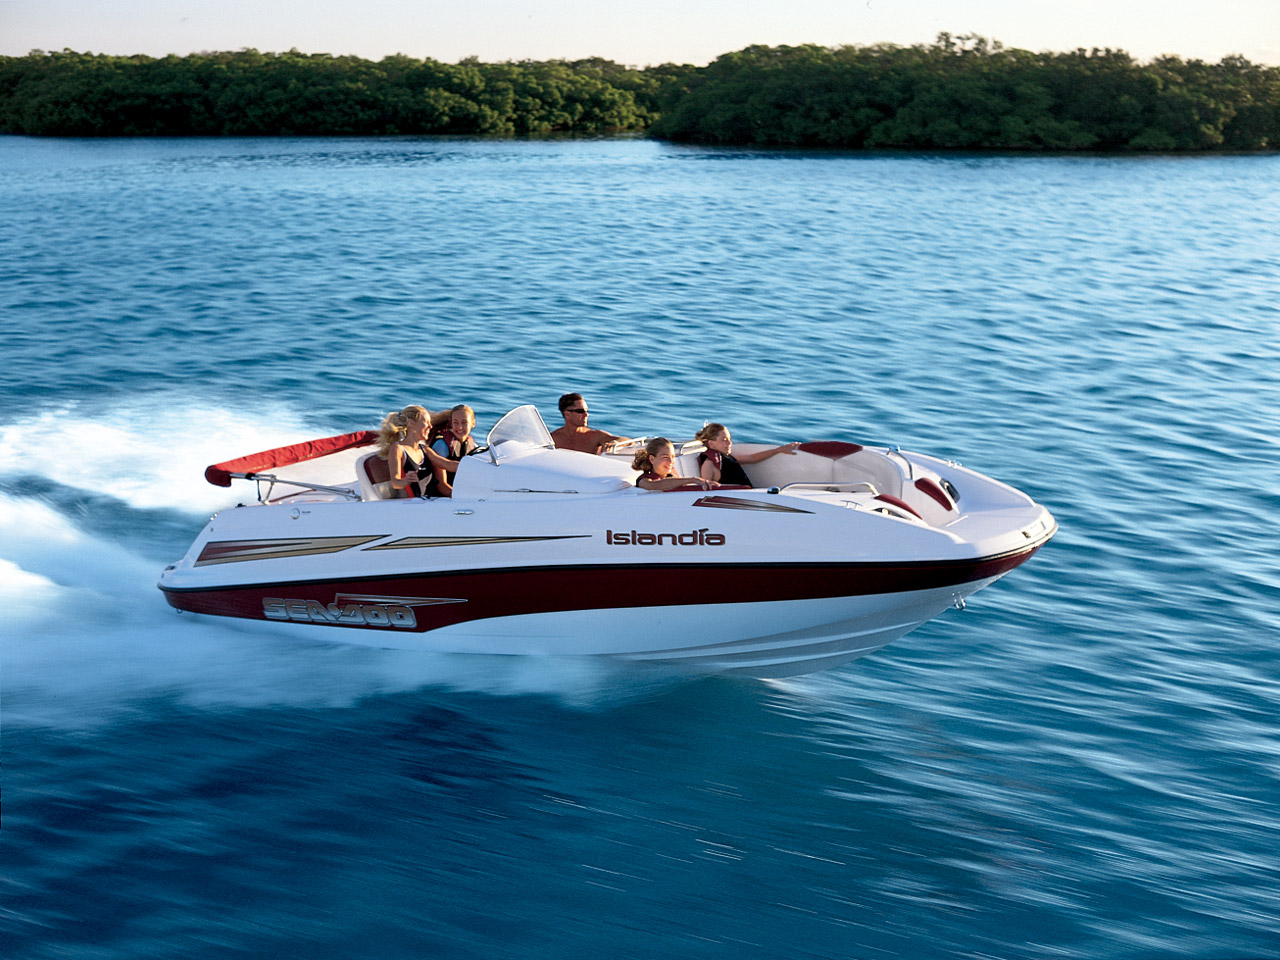 Winterizing Your Florida Boat: Do You Need Insurance In Winter?